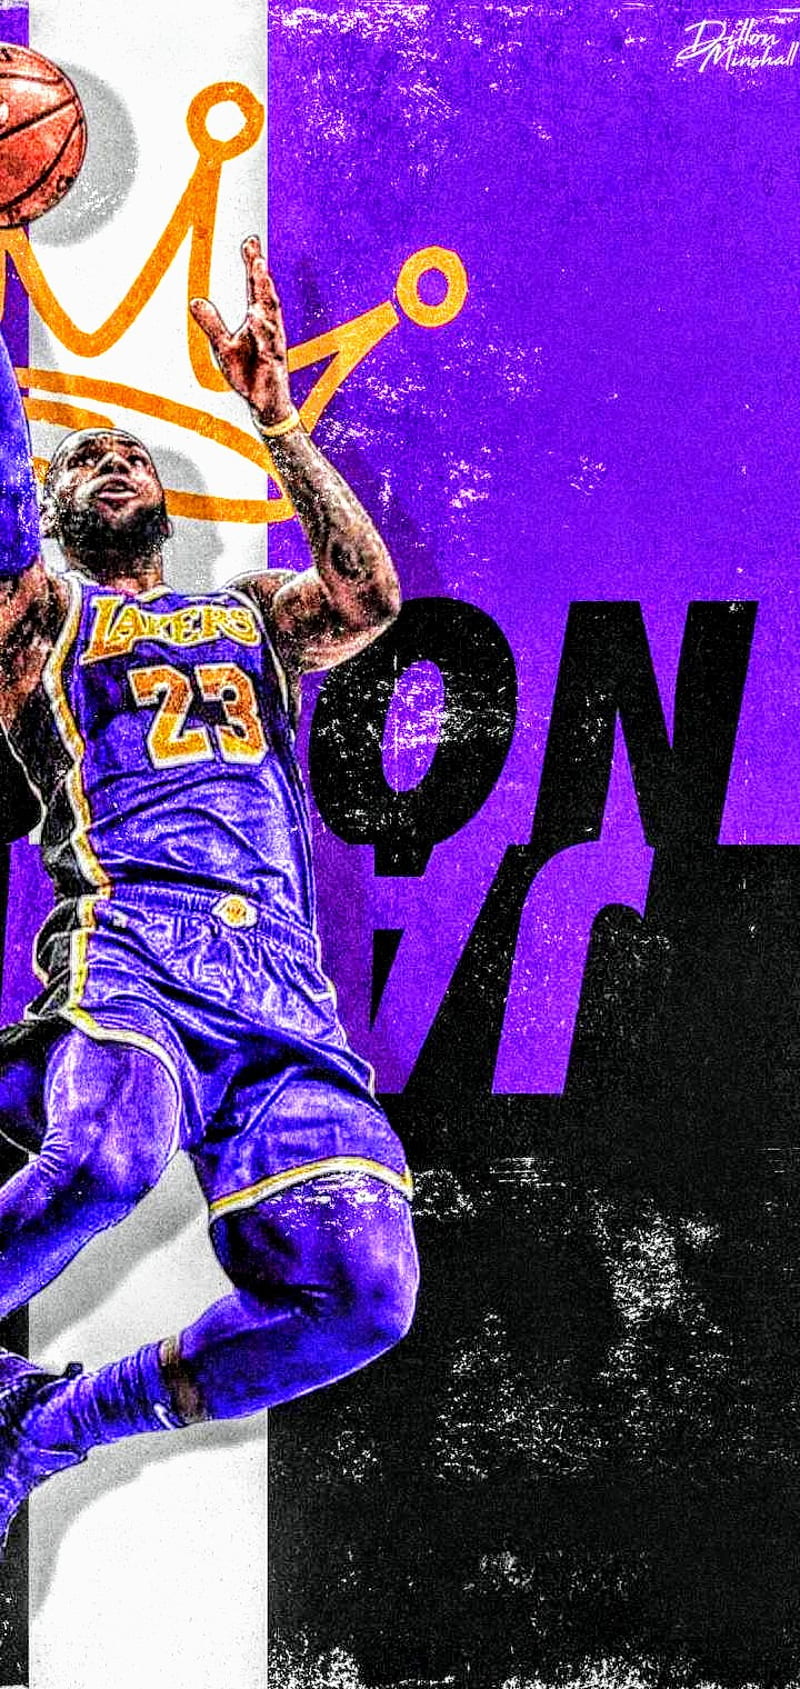 Download Lebron James Wallpapers Free for Android  Lebron James Wallpapers  APK Download  STEPrimocom